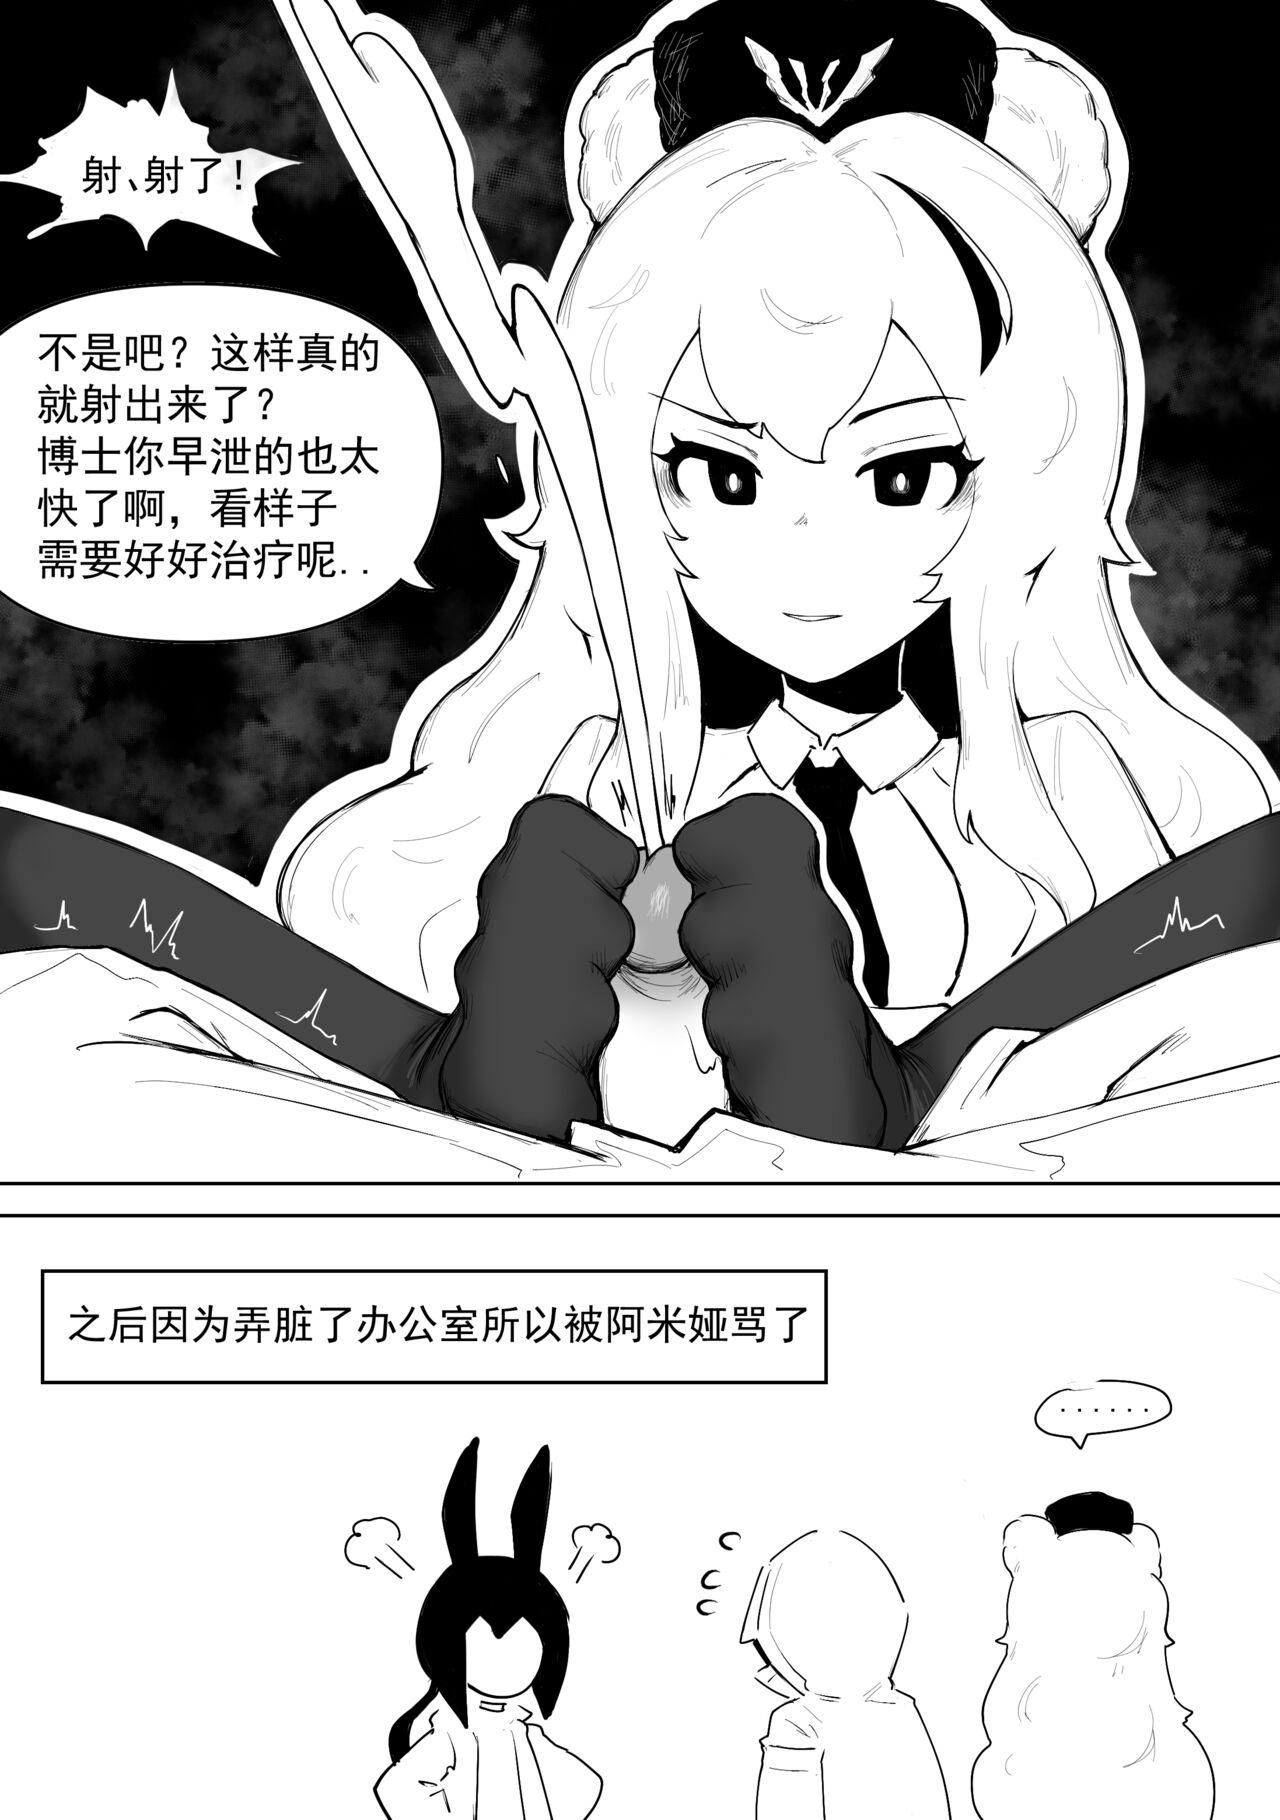 Bokep 澄澈之冰 早露 - Arknights Analfucking - Page 6